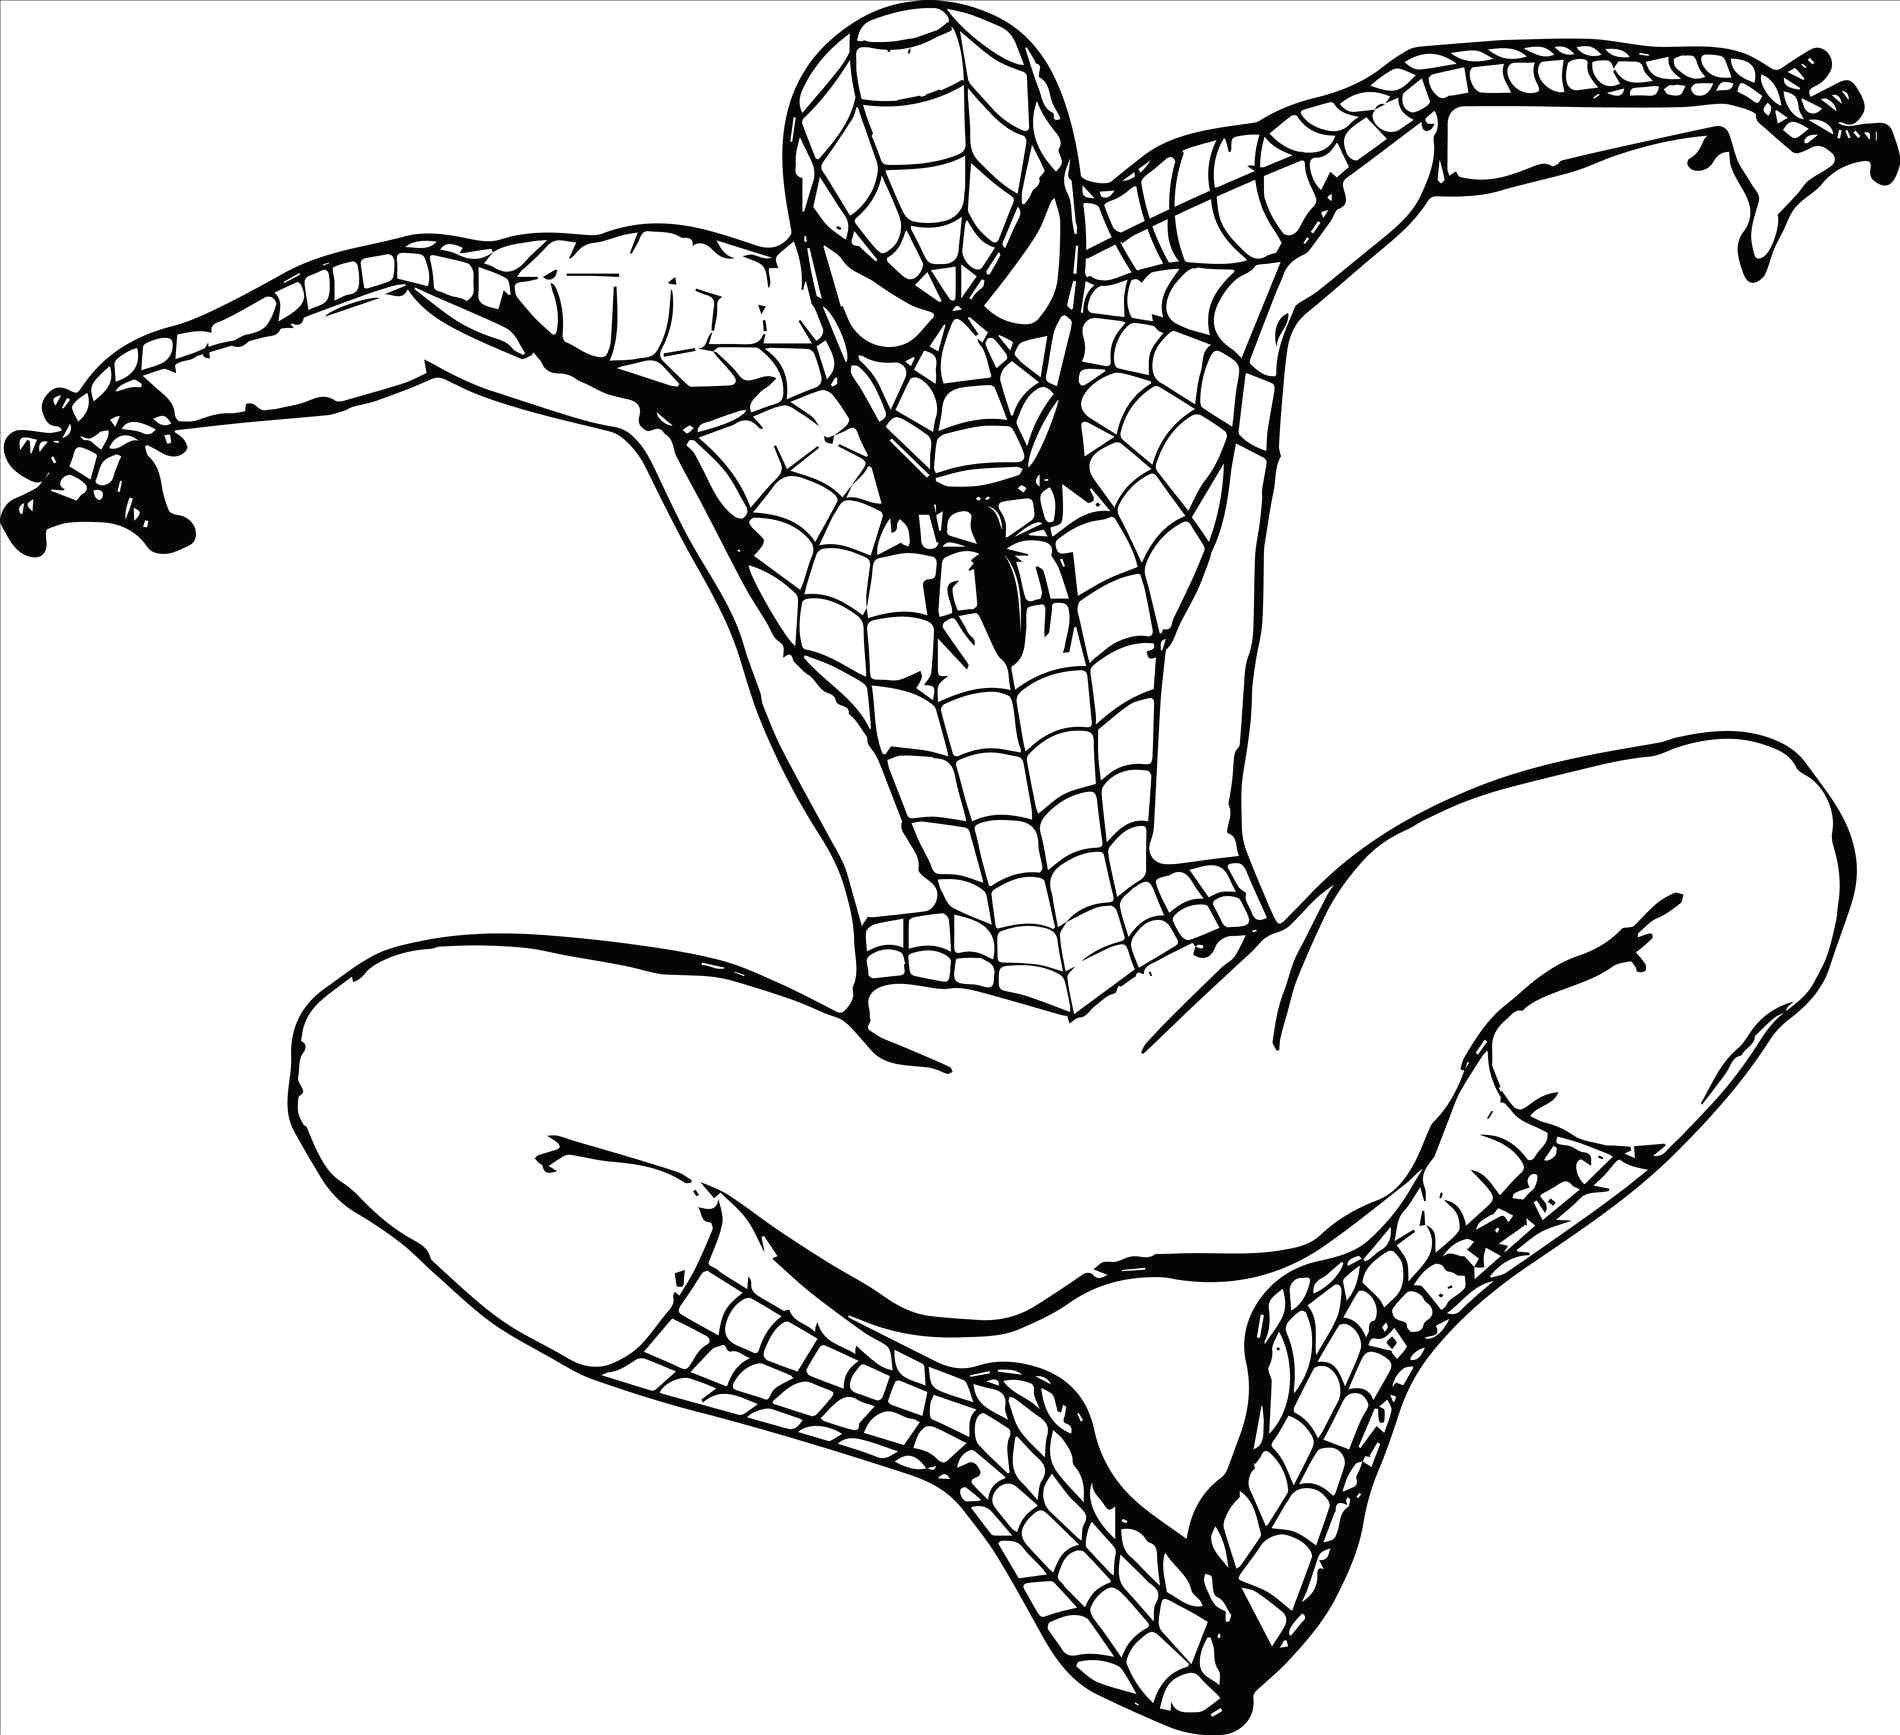 Drawings Easy Superheroes Superheroes Easy to Draw Spiderman Coloring Pages Luxury 0 0d